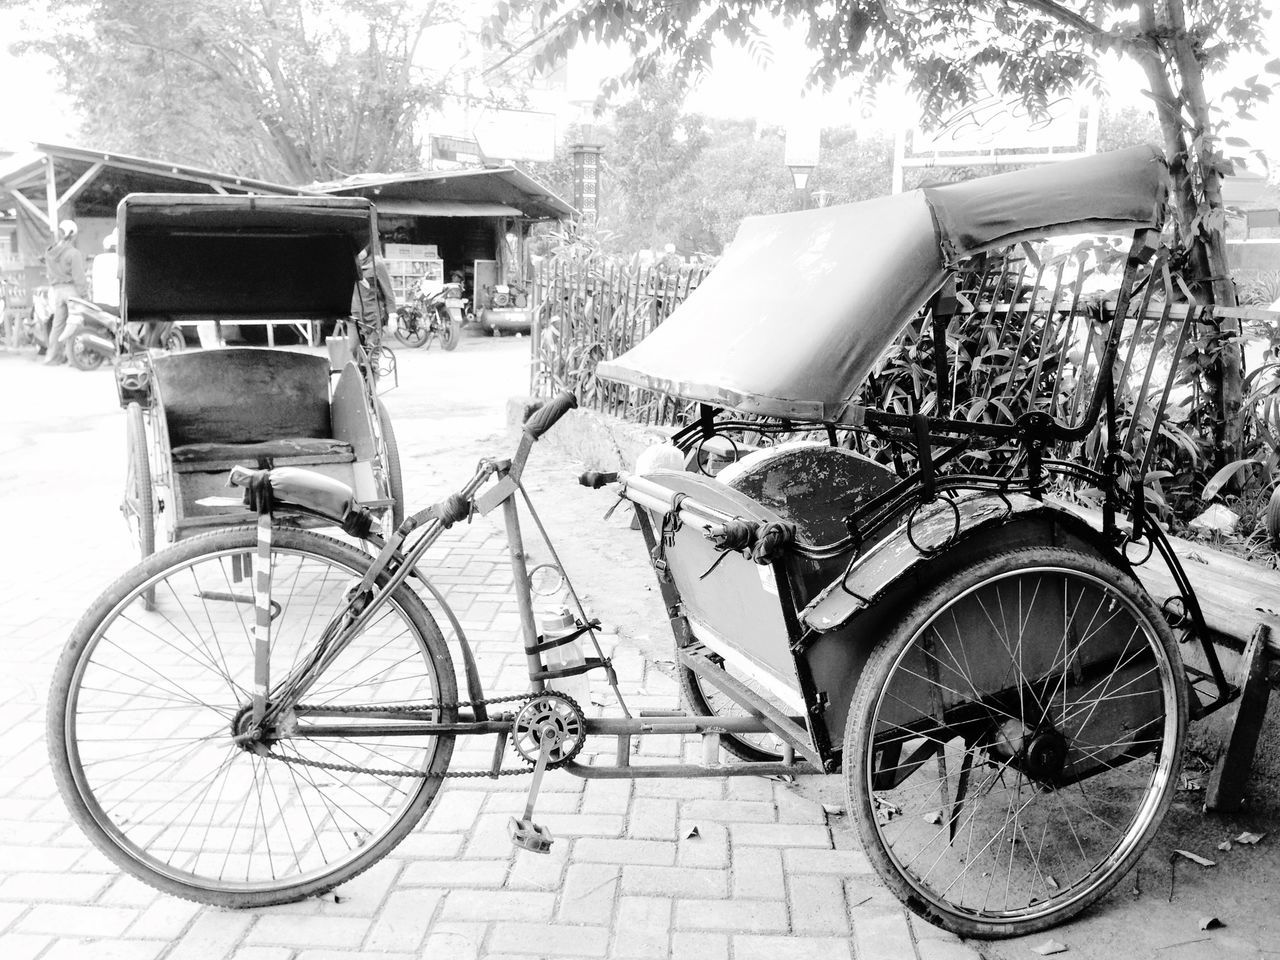 bicycle, mode of transport, transportation, land vehicle, stationary, parked, parking, building exterior, built structure, wheel, architecture, tree, cycle, travel, day, leaning, outdoors, street, house, cart